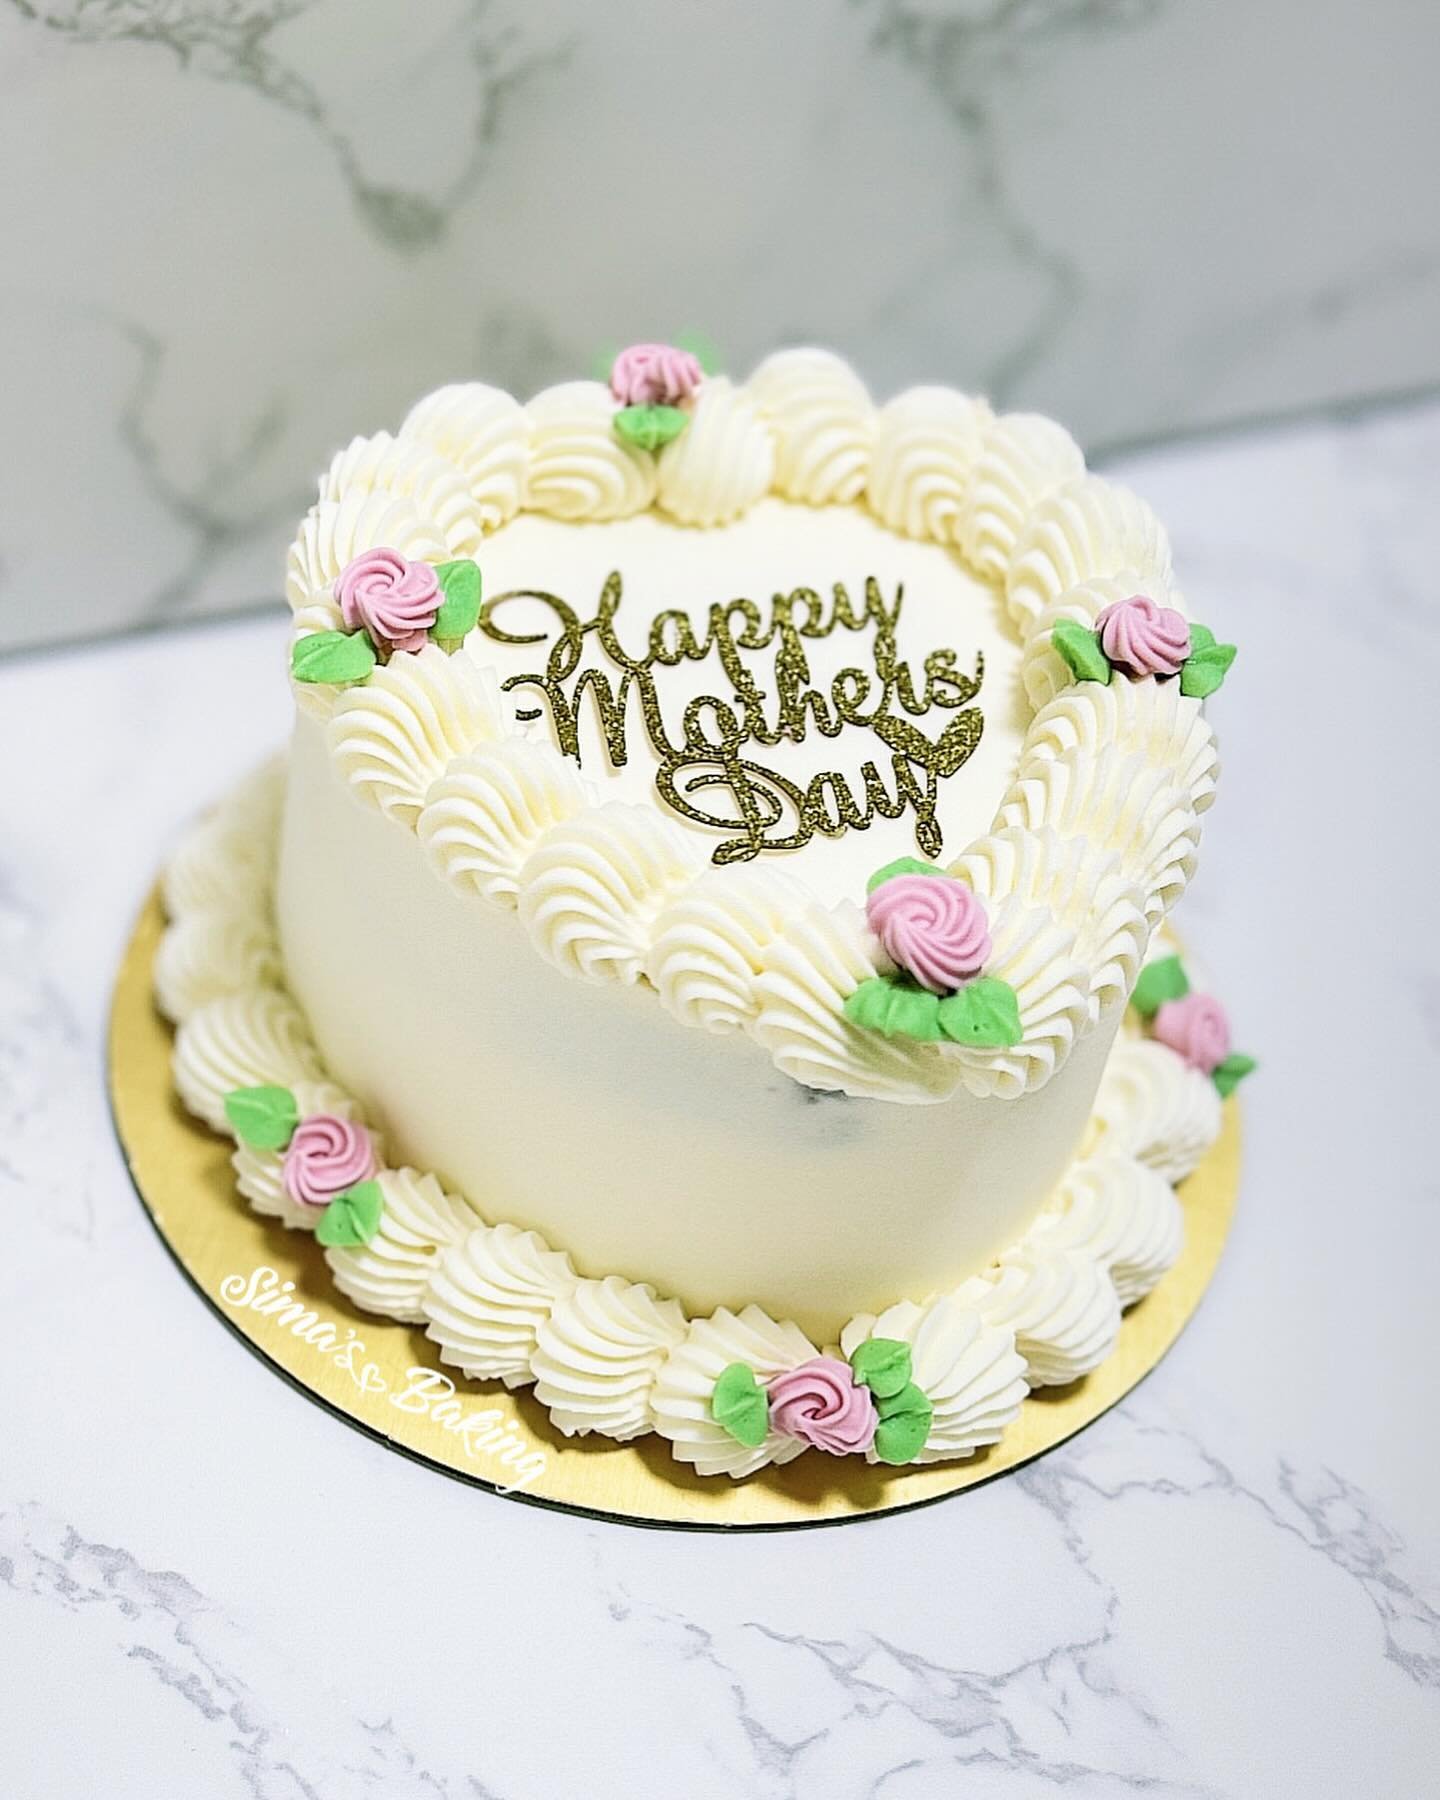 ✨Mother&rsquo;s Day appreciation sale✨
Sale dates 5/4-5/11. 
As an appreciation to all the mothers out there, my Mother&rsquo;s Day items will be discontinued $10. 

Mother&rsquo;s Day mini heart cake. 
2 layers mini heart cake (vanilla, chocolate or